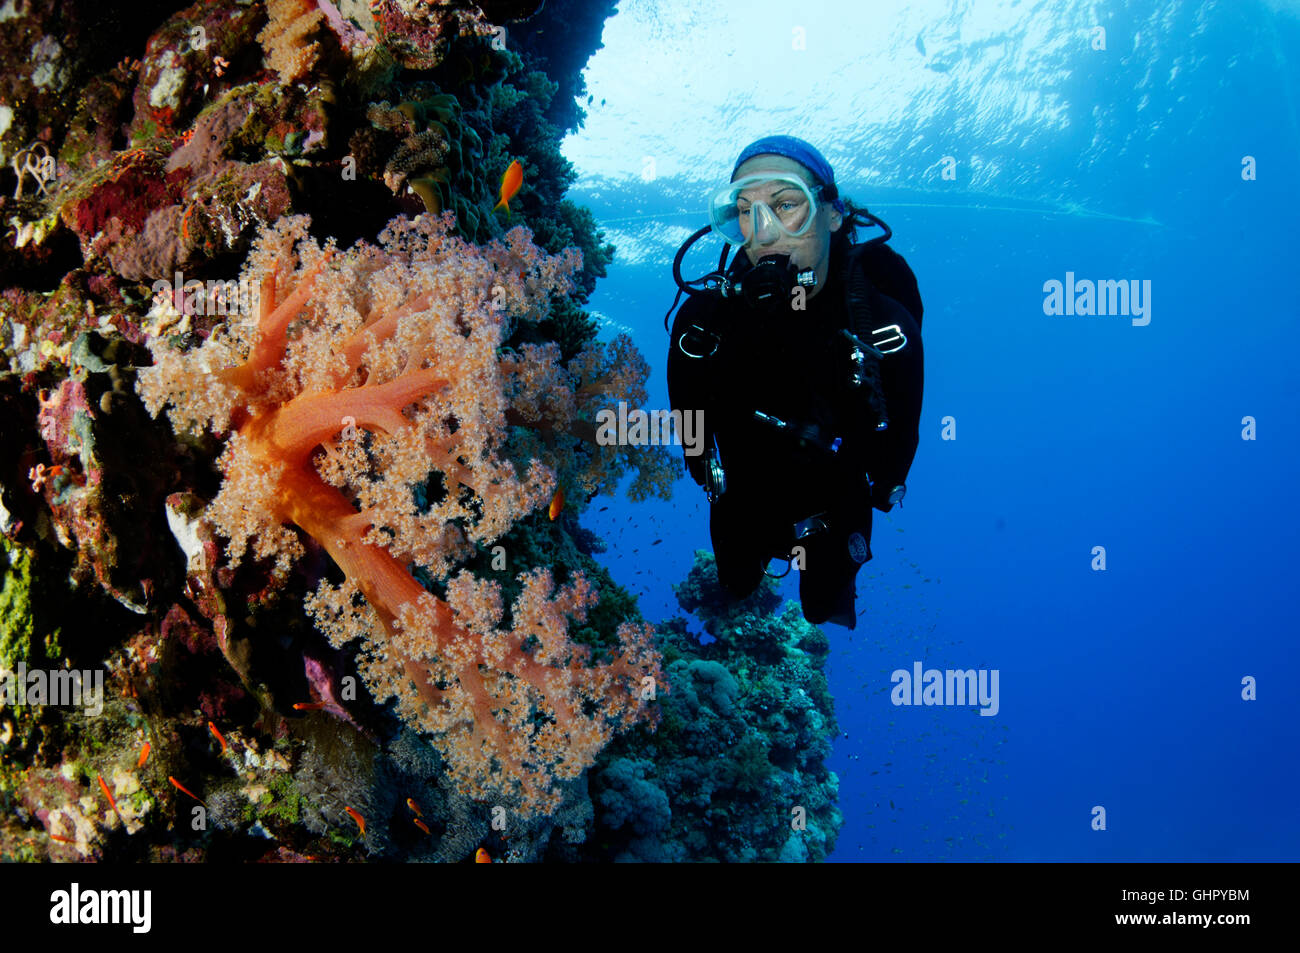 Dendronephthya sp., Coralreef and Red softcoral and scuba diver, Elphinestone Reef, Red Sea, Egypt, Africa Stock Photo